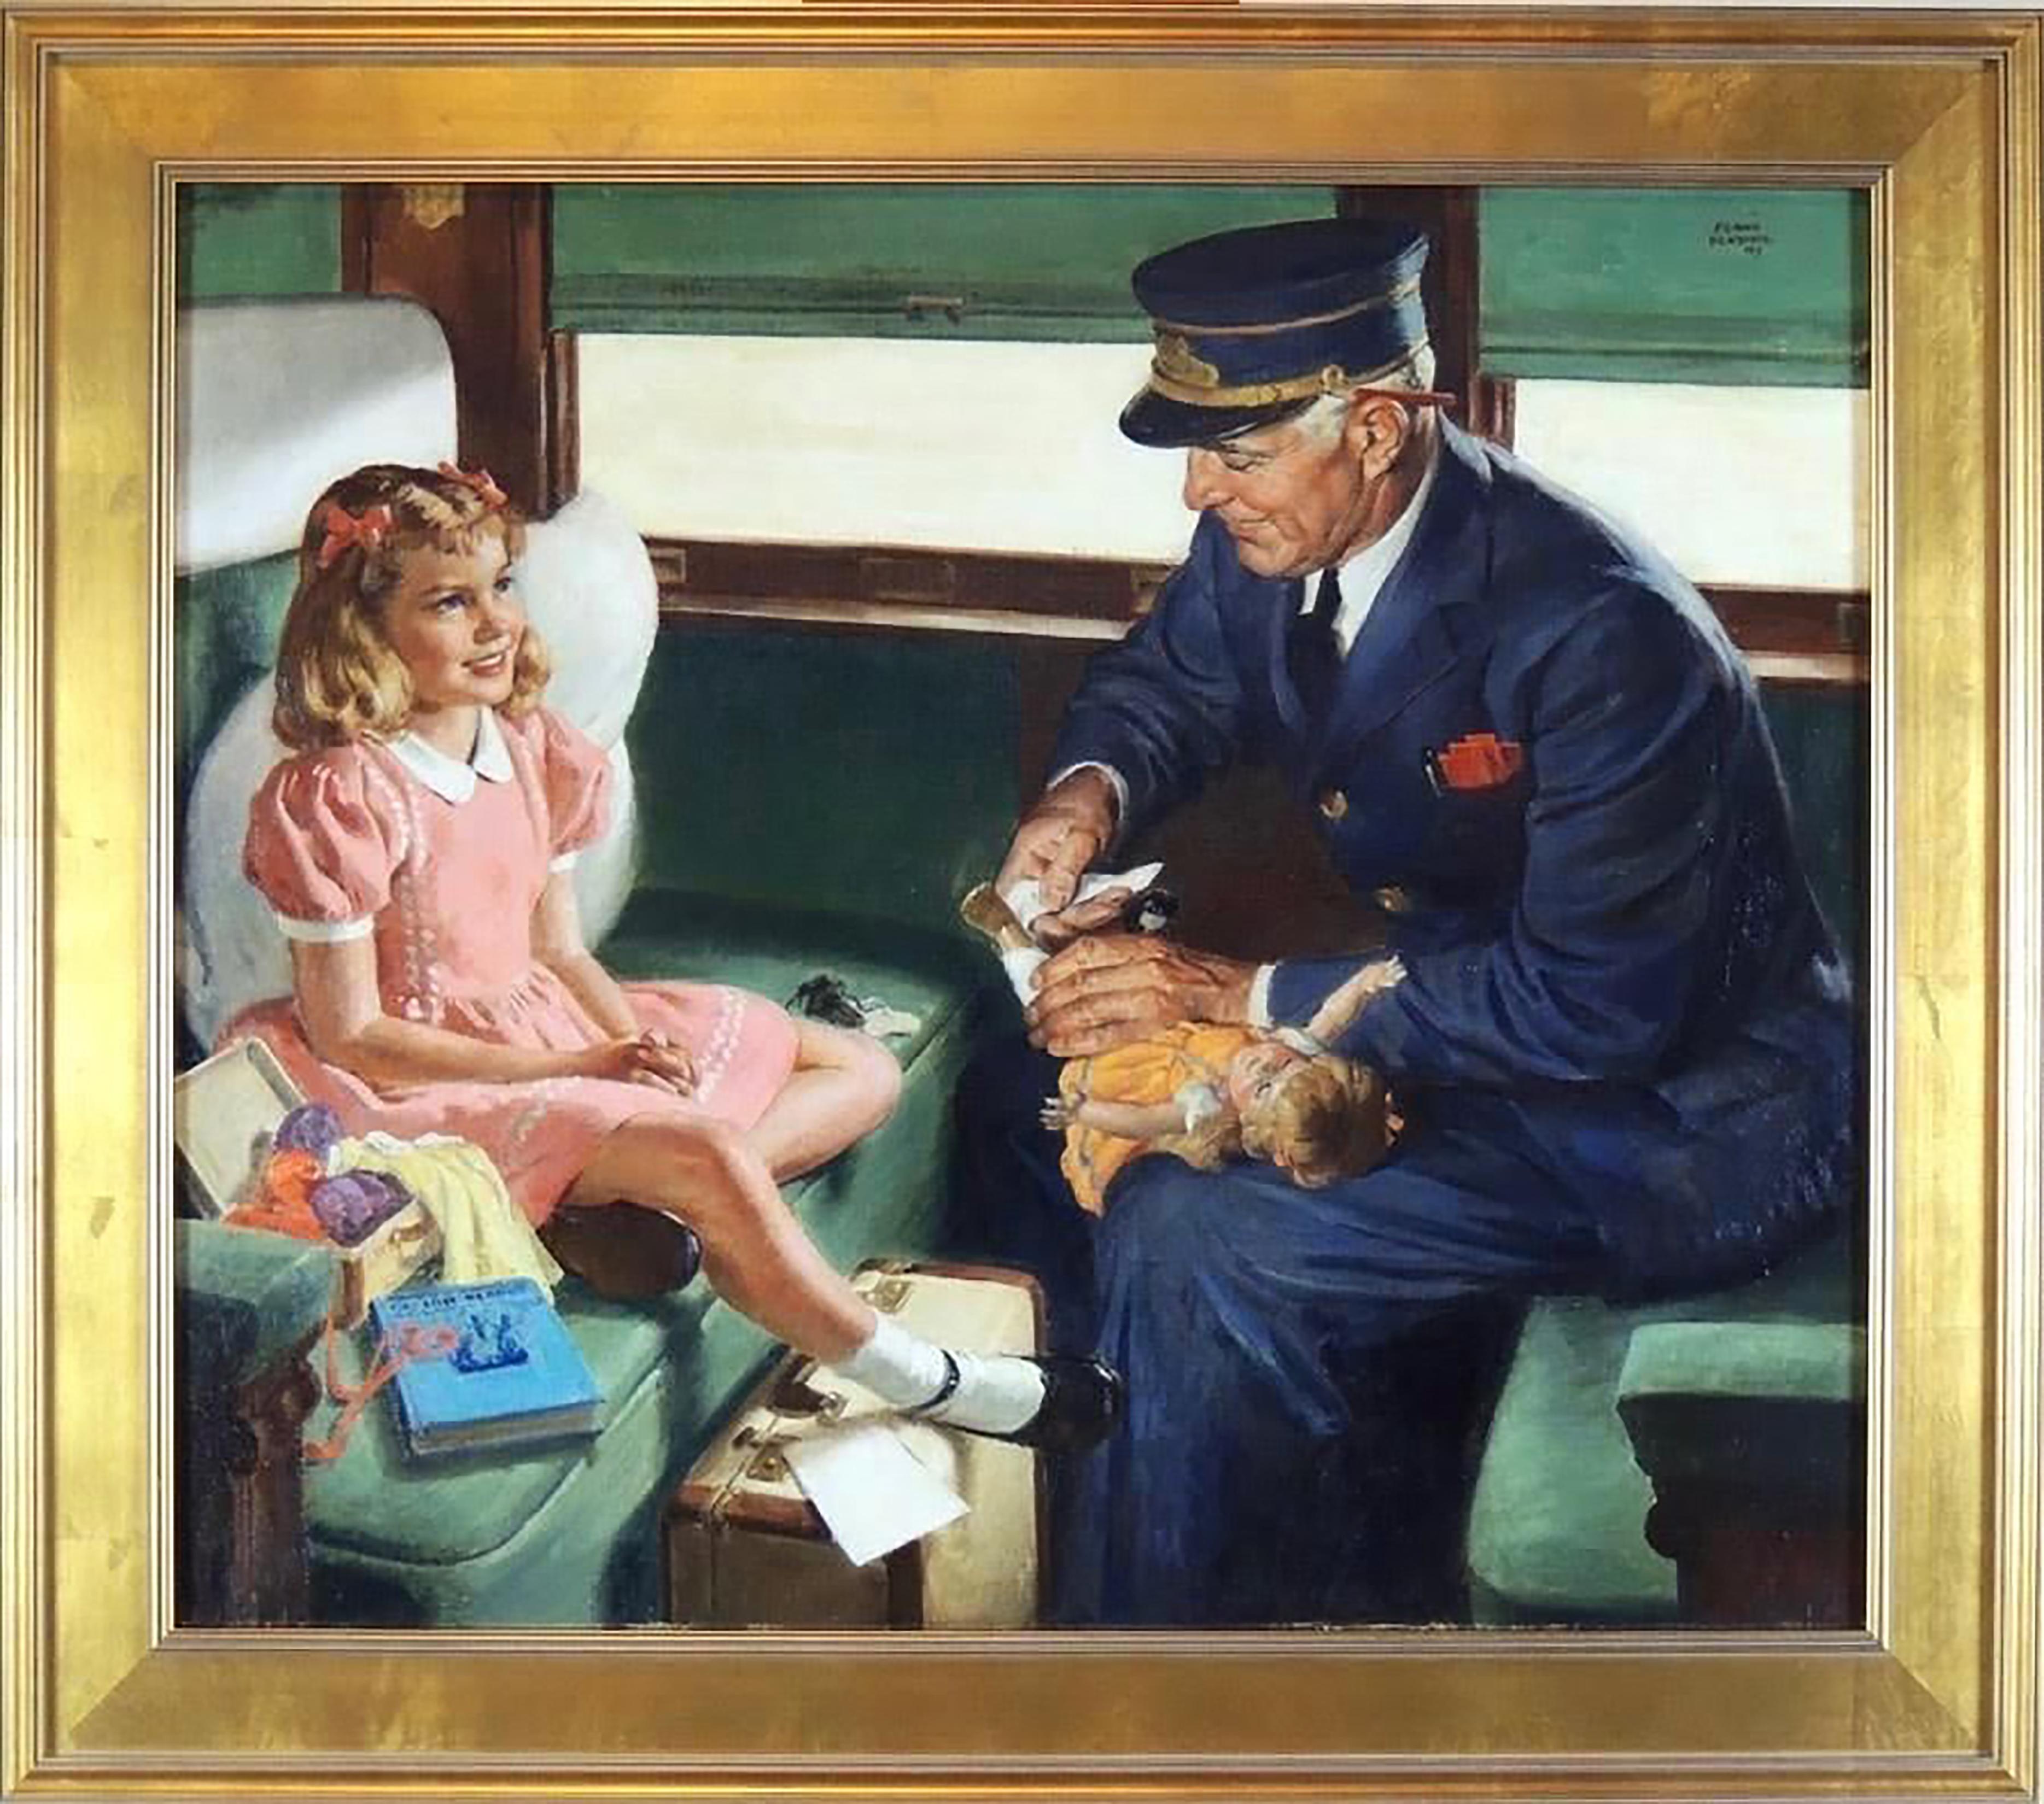 Little Girl and the Conductor - Painting by Frank Bensing